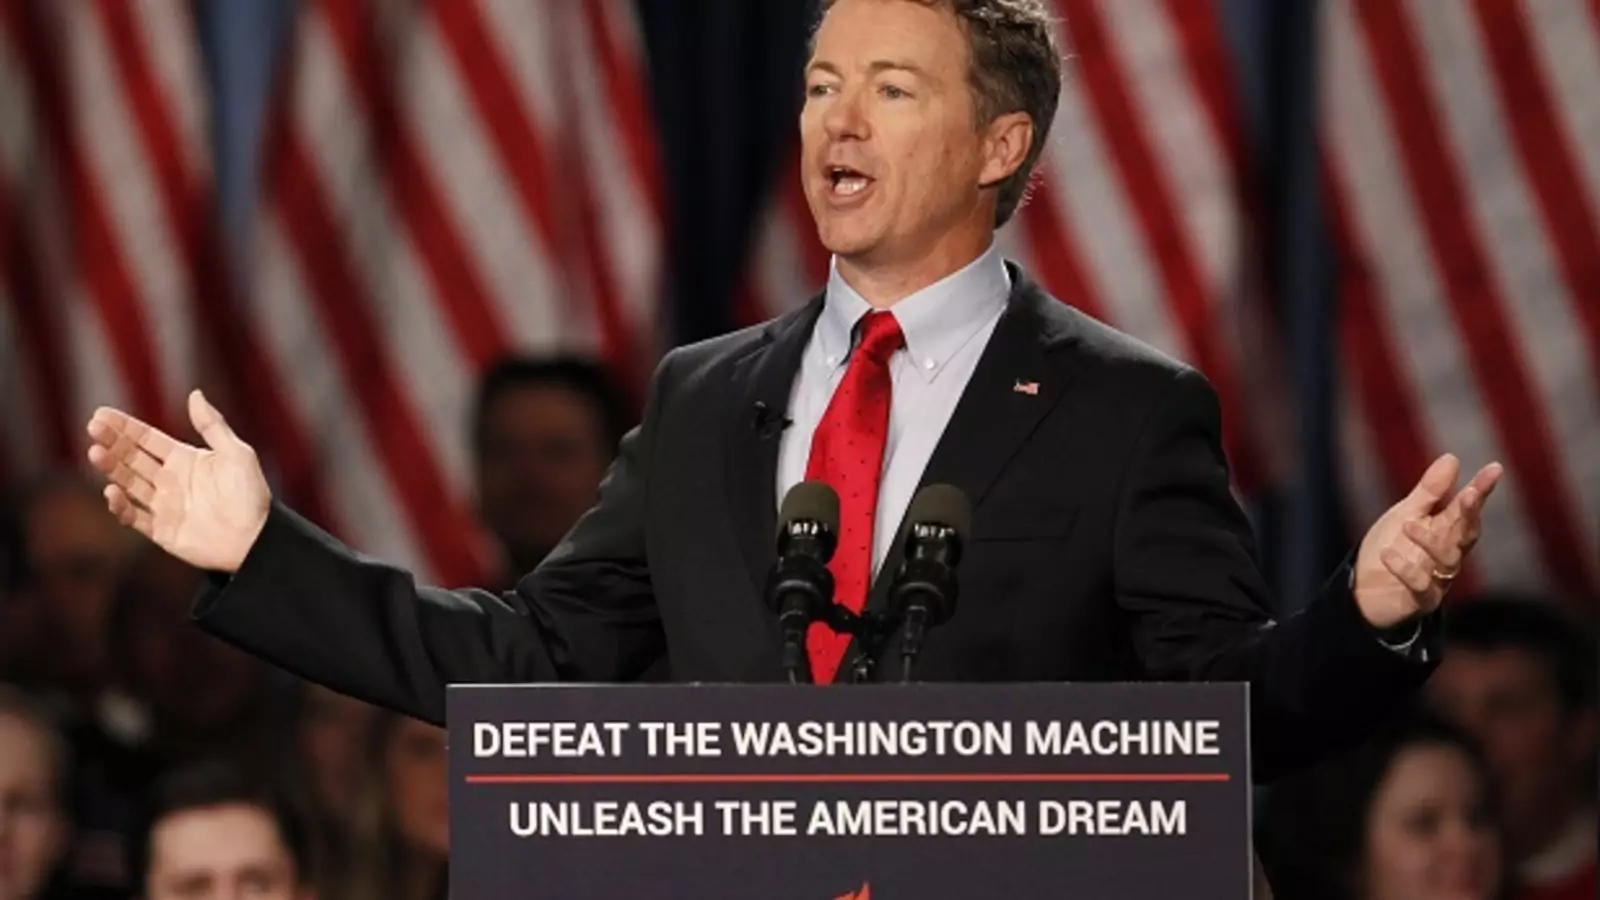 Campaign 2016: Senator Rand Paul, GOP Presidential Candidate | Council on Foreign ...